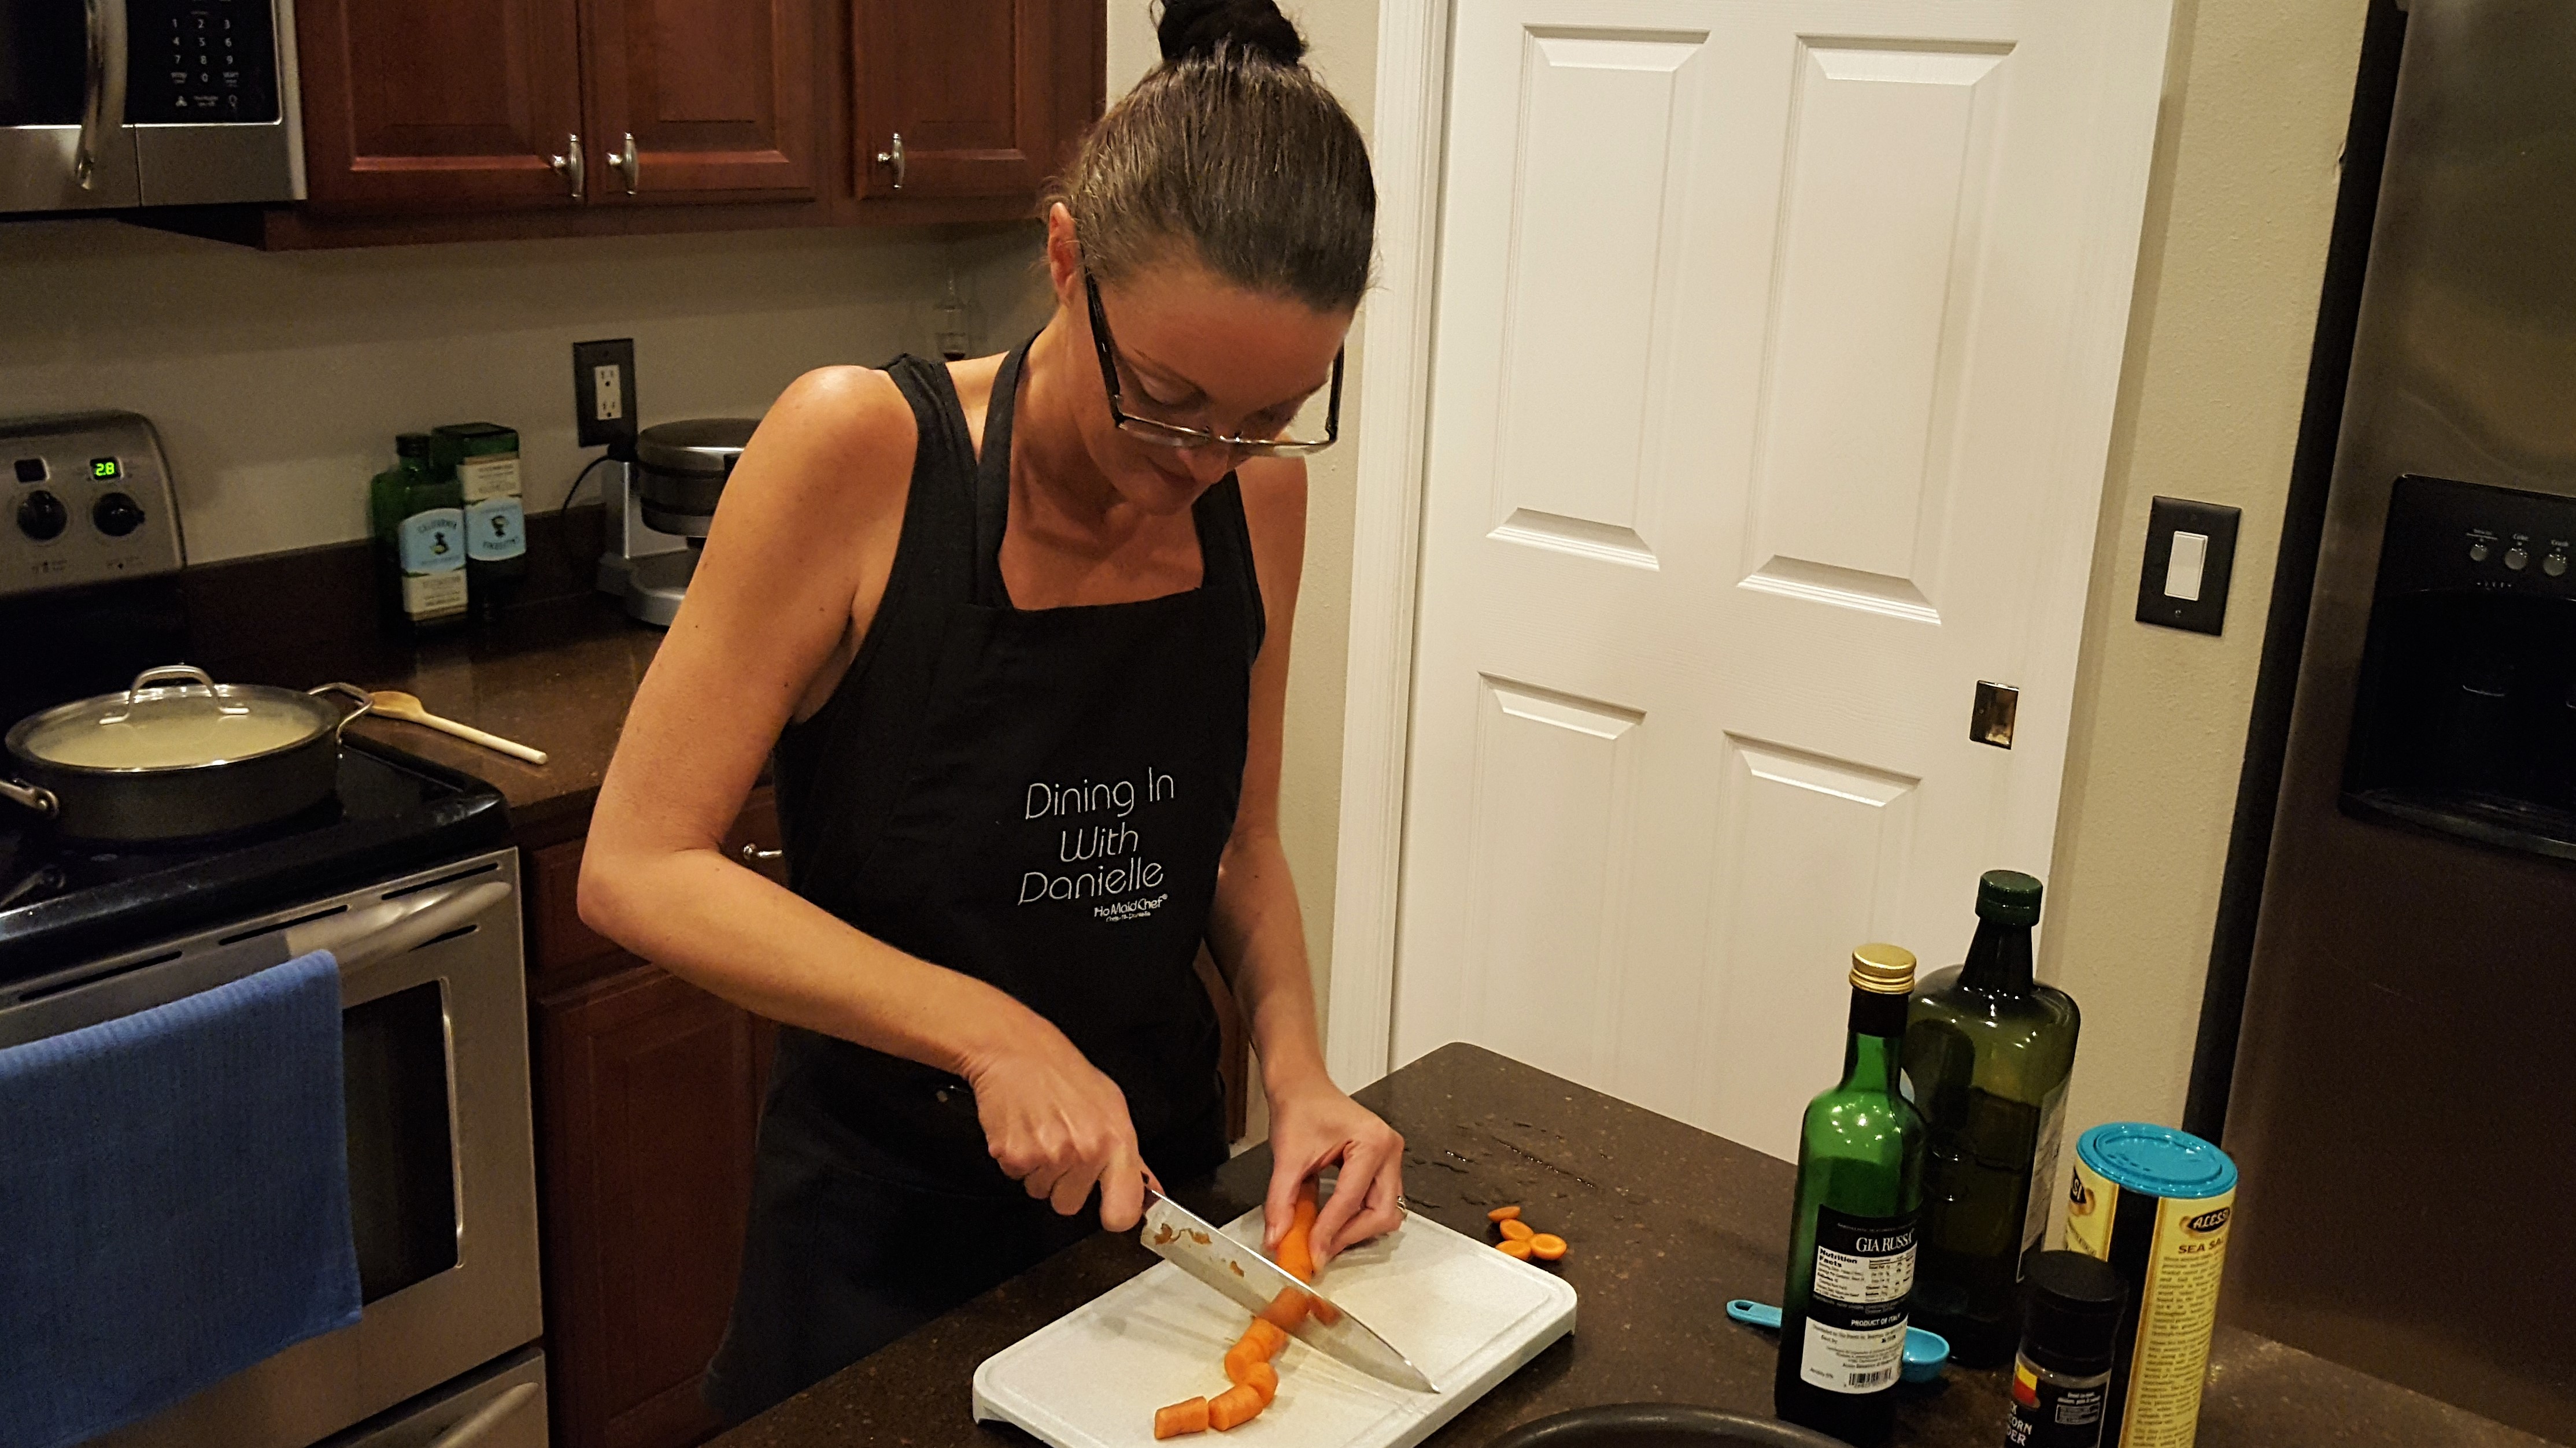 Cutting up the carrots to be Oven Roasted - Dining in with Danielle